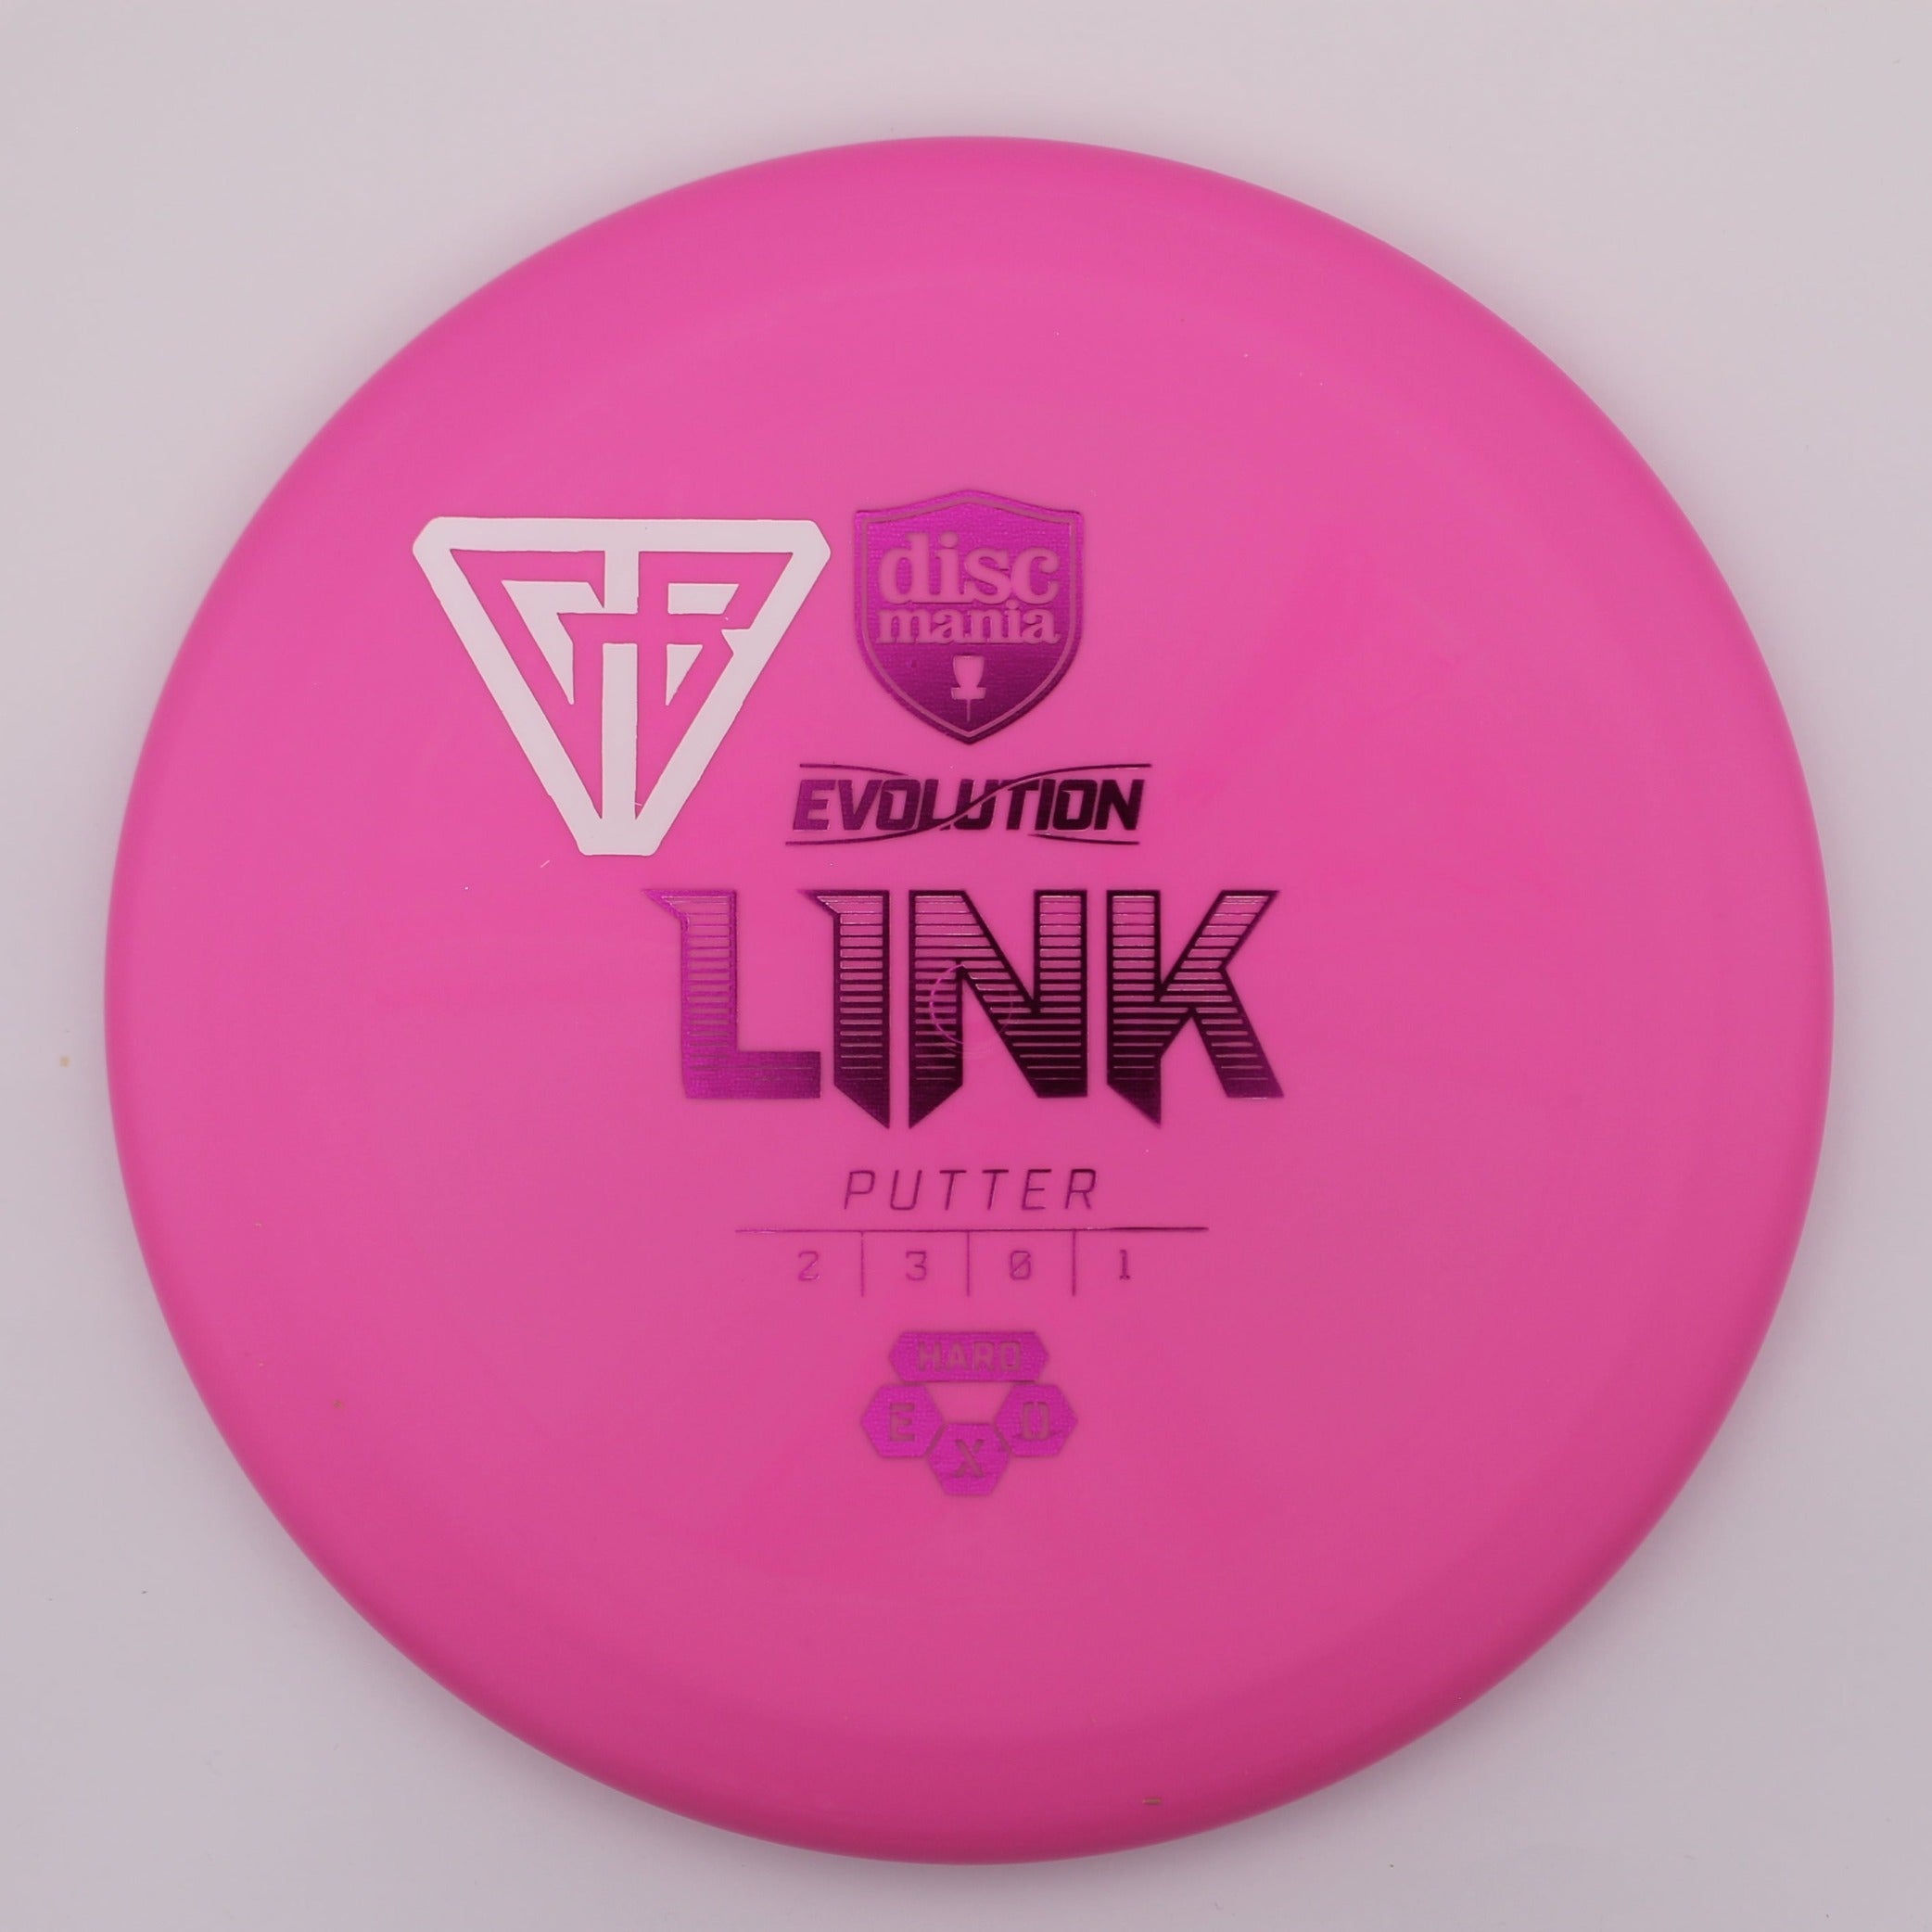 Discmania Putt & Approach Link Exo Hard with Gannon Buhr Logo